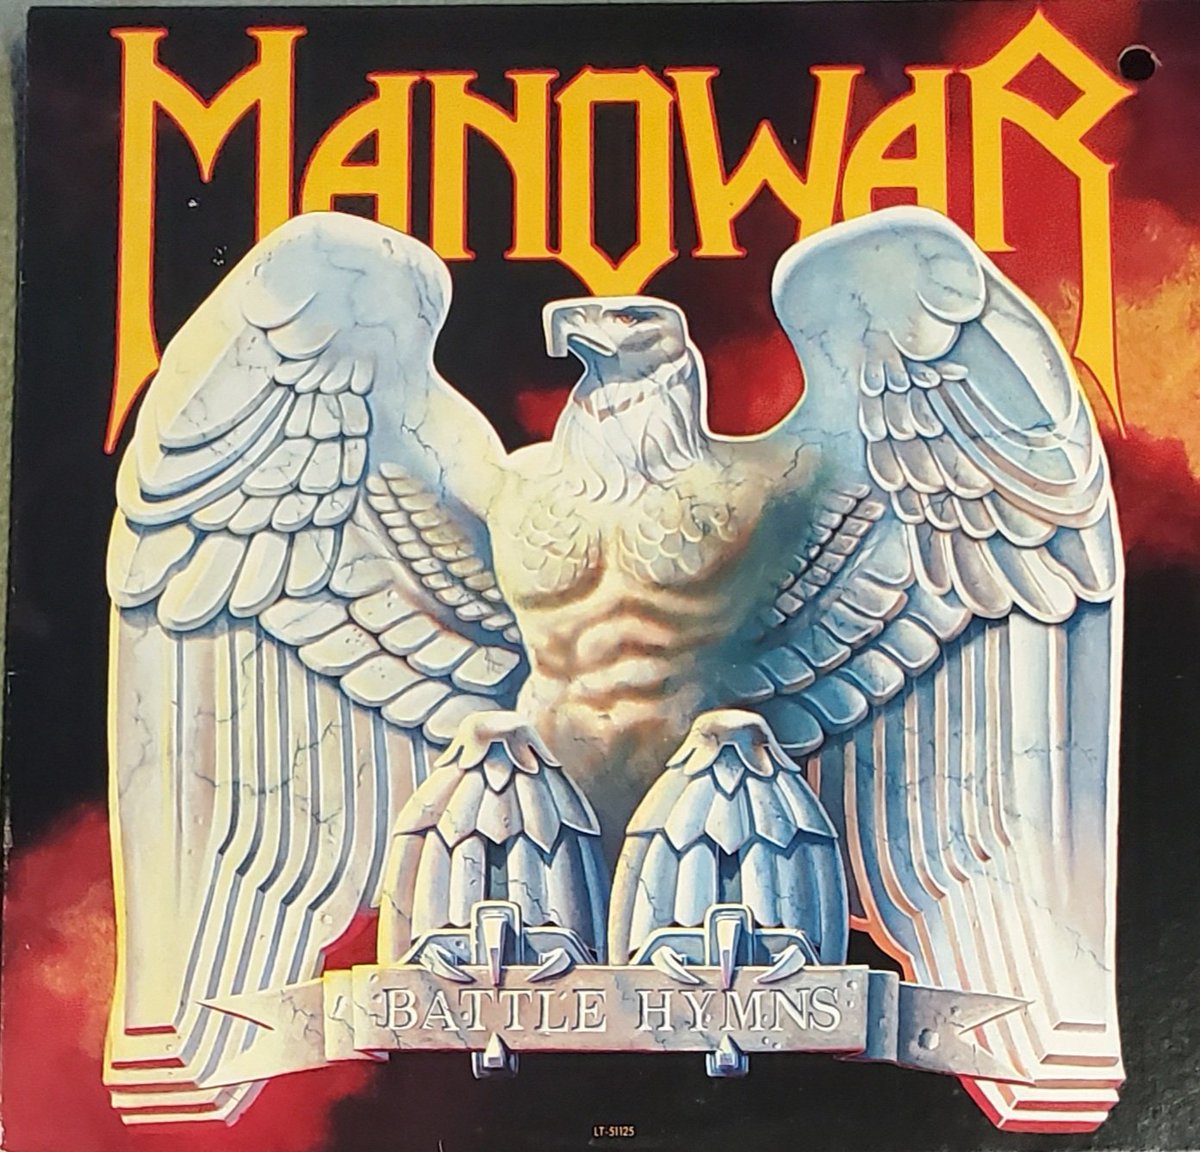 Hi, my name is Clint and I haven't bought a record in well over 3 hours now. Vinyl Anonymous member. 0 days free from the wax.

Blue Öyster Cult - 'Fire Of Unknown Origin' (1981)

Manowar - 'Battle Hymns' (1982)